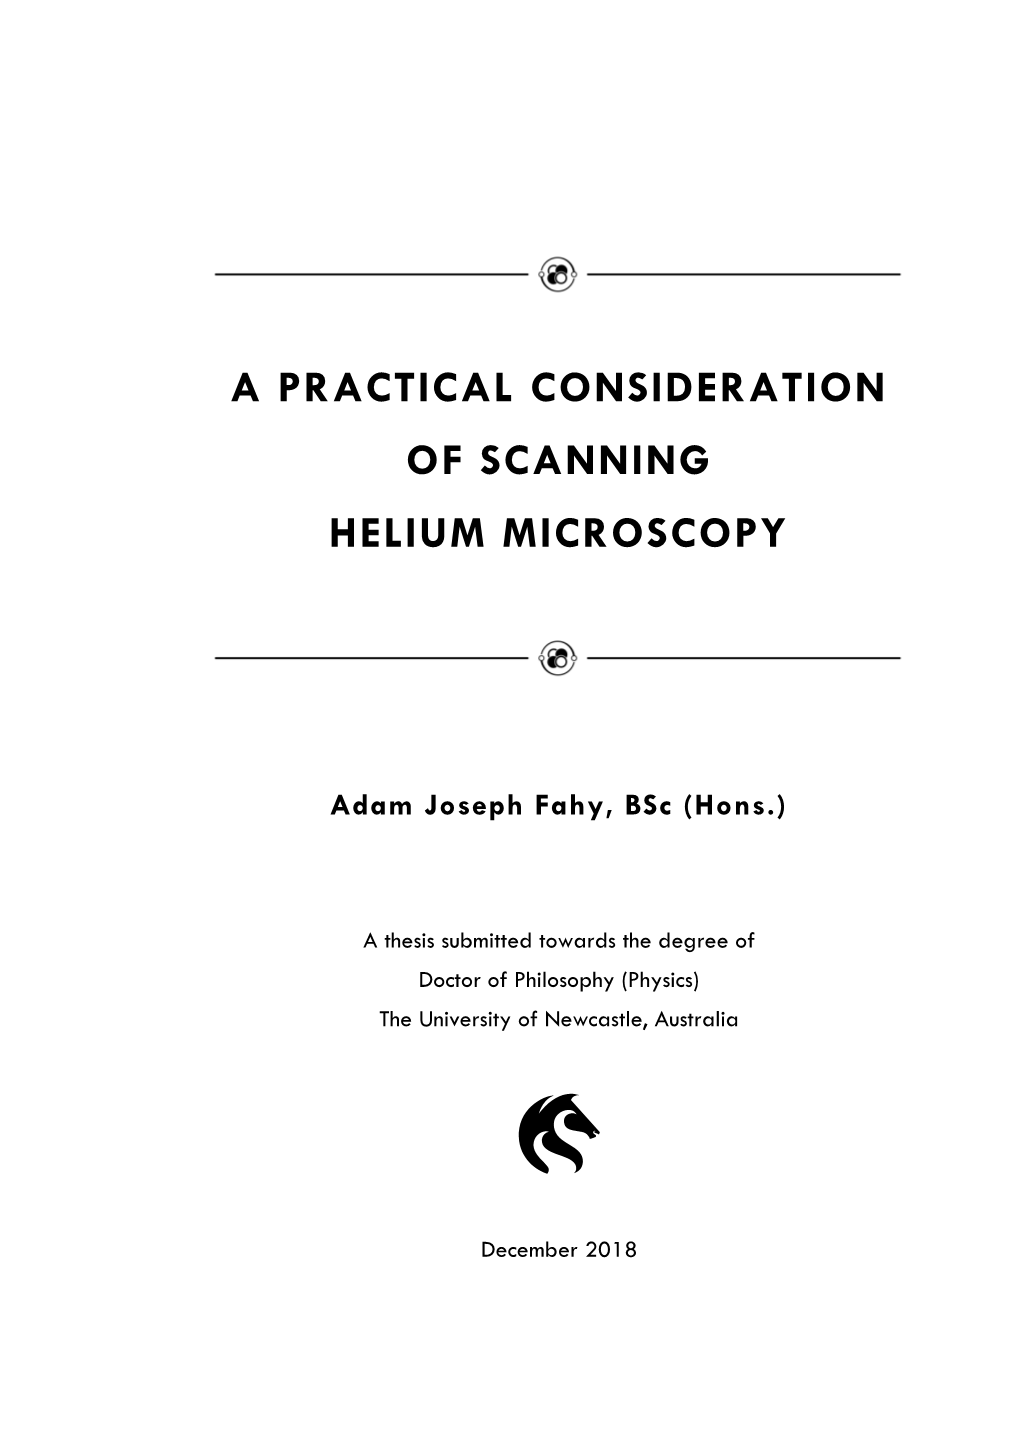 A Practical Consideration of Scanning Helium Microscopy